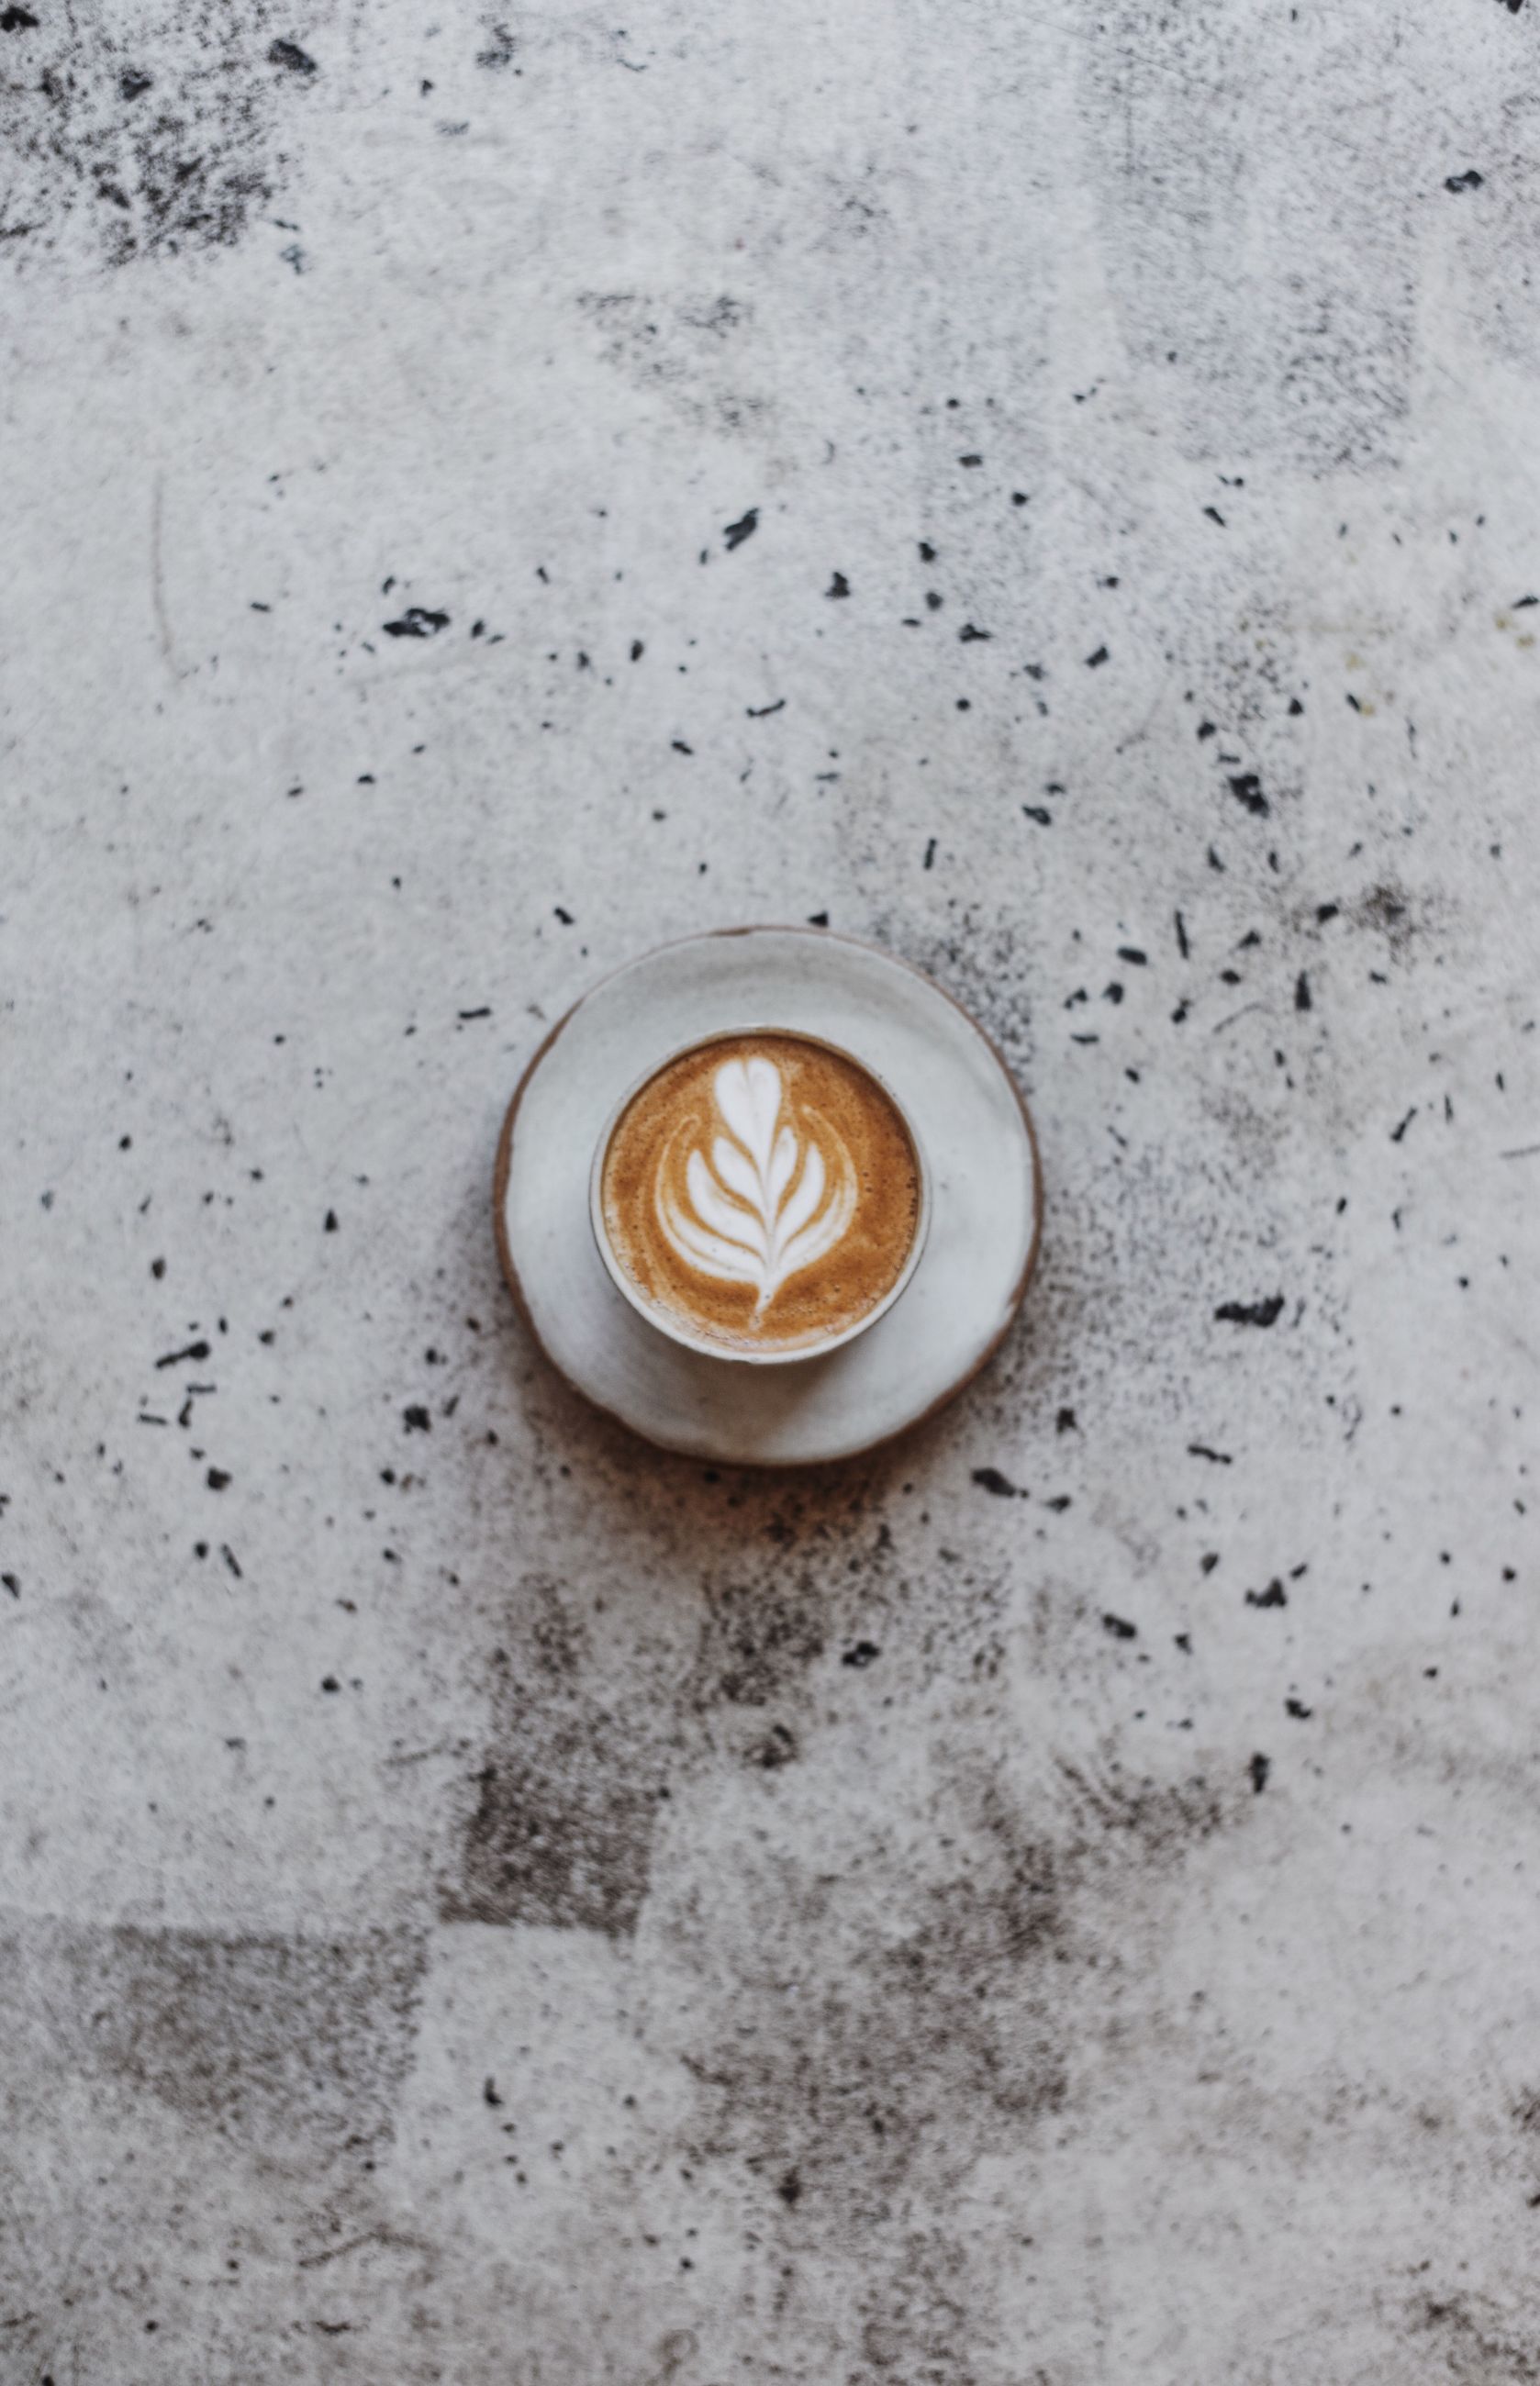 coffee, refreshment, drink, coffee cup, coffee - drink, cup, food and drink, mug, frothy drink, cappuccino, hot drink, directly above, froth art, still life, latte, no people, freshness, creativity, high angle view, food, crockery, non-alcoholic beverage